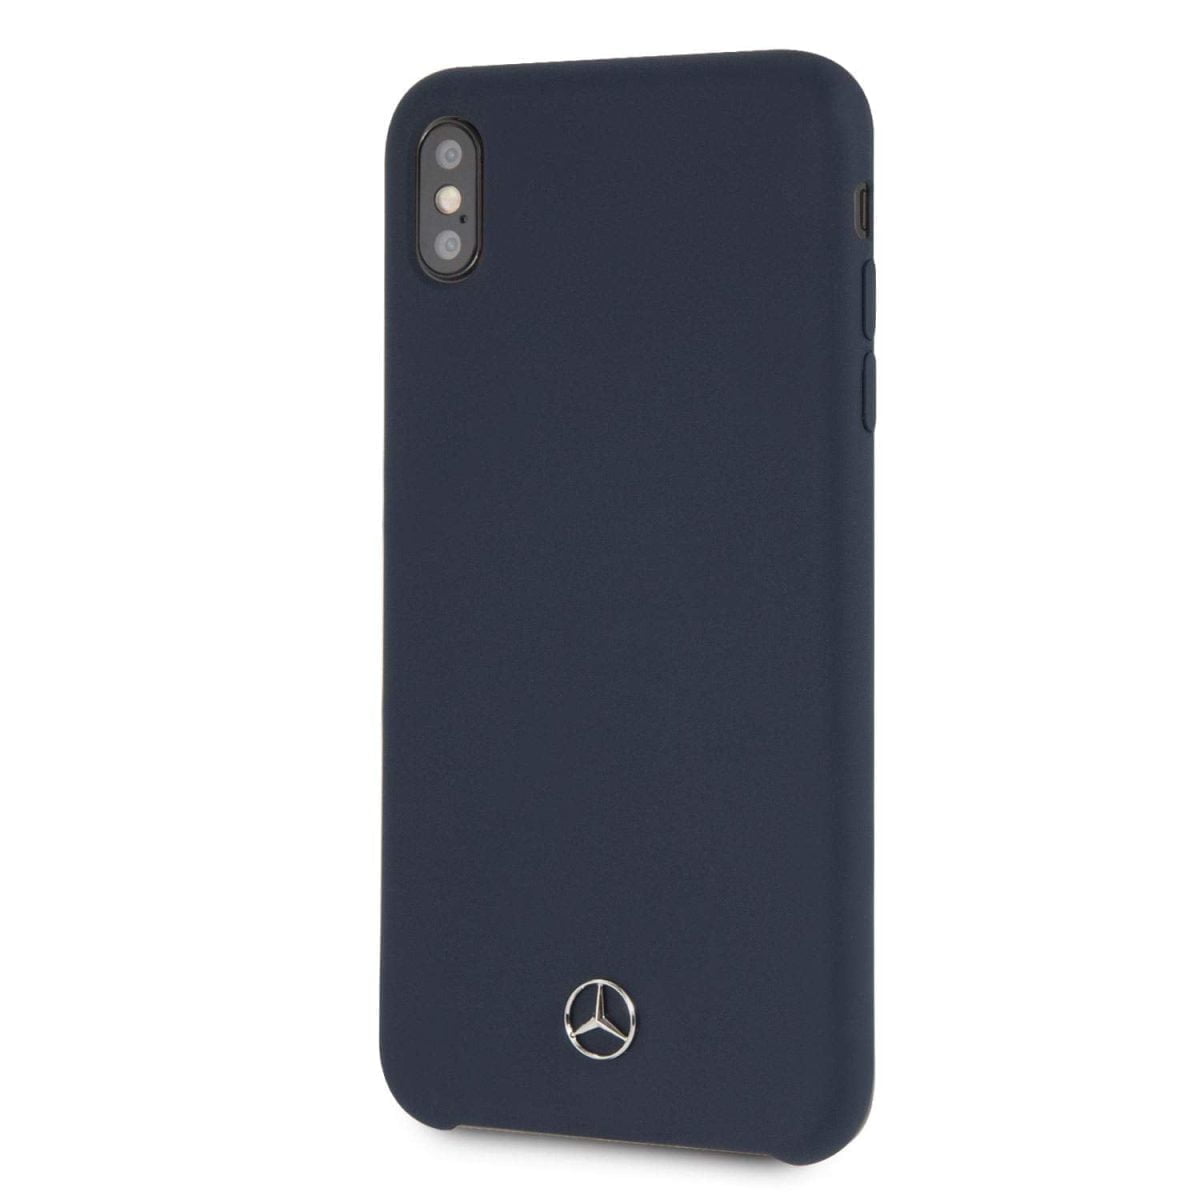 Mercedes Benz Iphone Xs Max Liquid Silicon Silcon Case With Microfiber Lining Navy 02 This Hard Silicone Soft Case With A Sculpted Metallic Mercedes Benz Logo For A 3D Effect Gives You A Classic And Elegant Appeal To Your Handheld Device It Has Easy Accessibility For All Ports And Buttons. Case Compatible With Wireless Chargers. Soft Microfiber Interior, Easy To Hold &Amp; Easy Snap-On Design Makes It Fast And Easy To Install Or Take Off In Seconds This Case Provides Both The Ultimate Luxury Experience And Protection From Scratches And Abrasions By Slightly Raised Edges Iphone Silicon Case Iphone Xs Max Liquid Silicon - Silicon Case With Microfiber Lining (Navy Blue) Mercedes-Benz